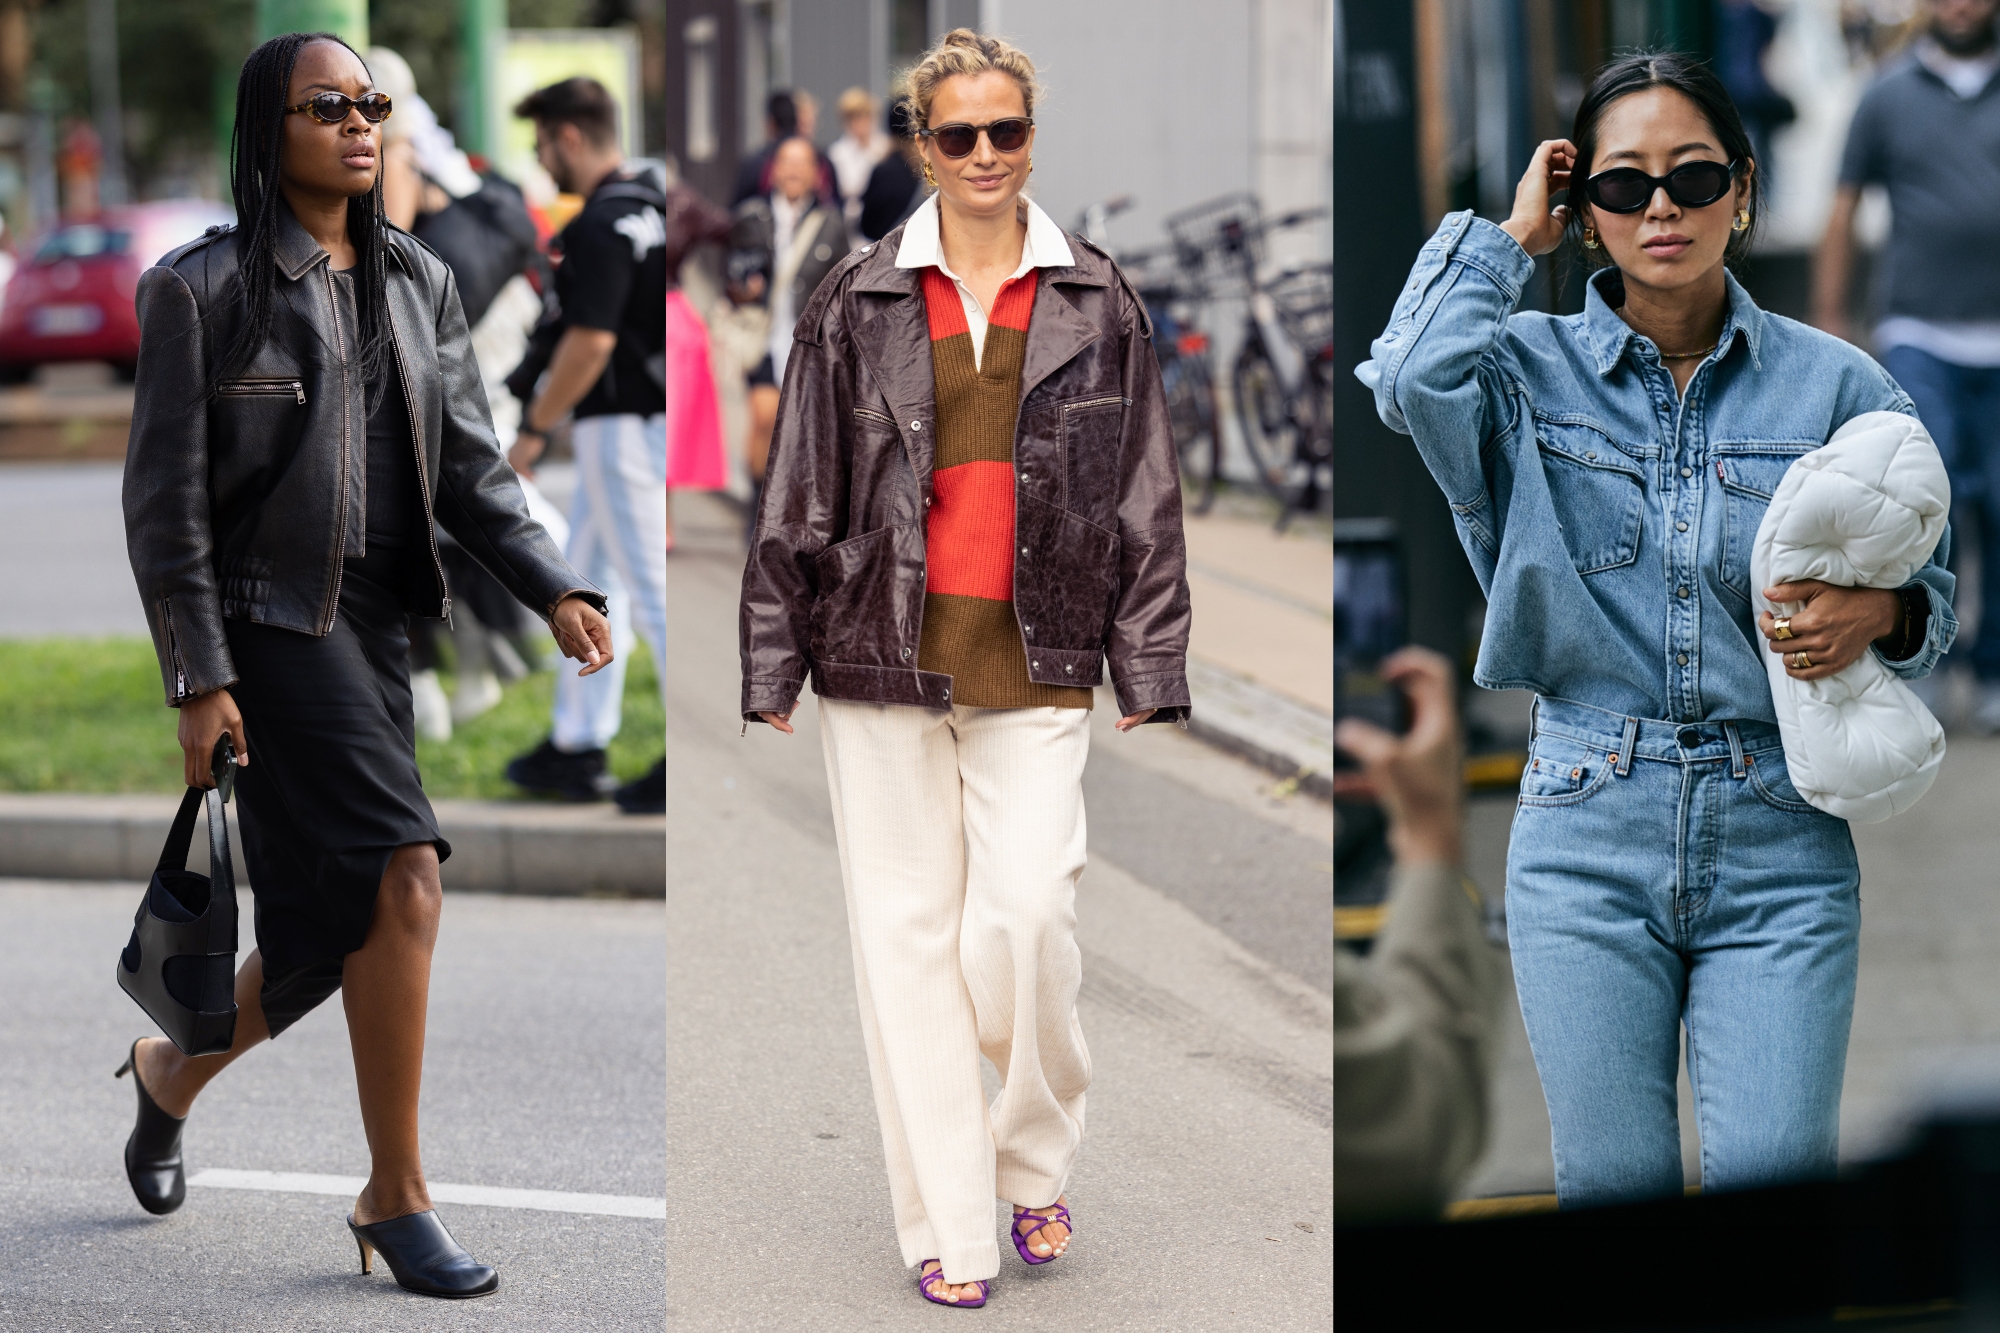 How To Wear A Trench Coat Like The Fashion Crowd